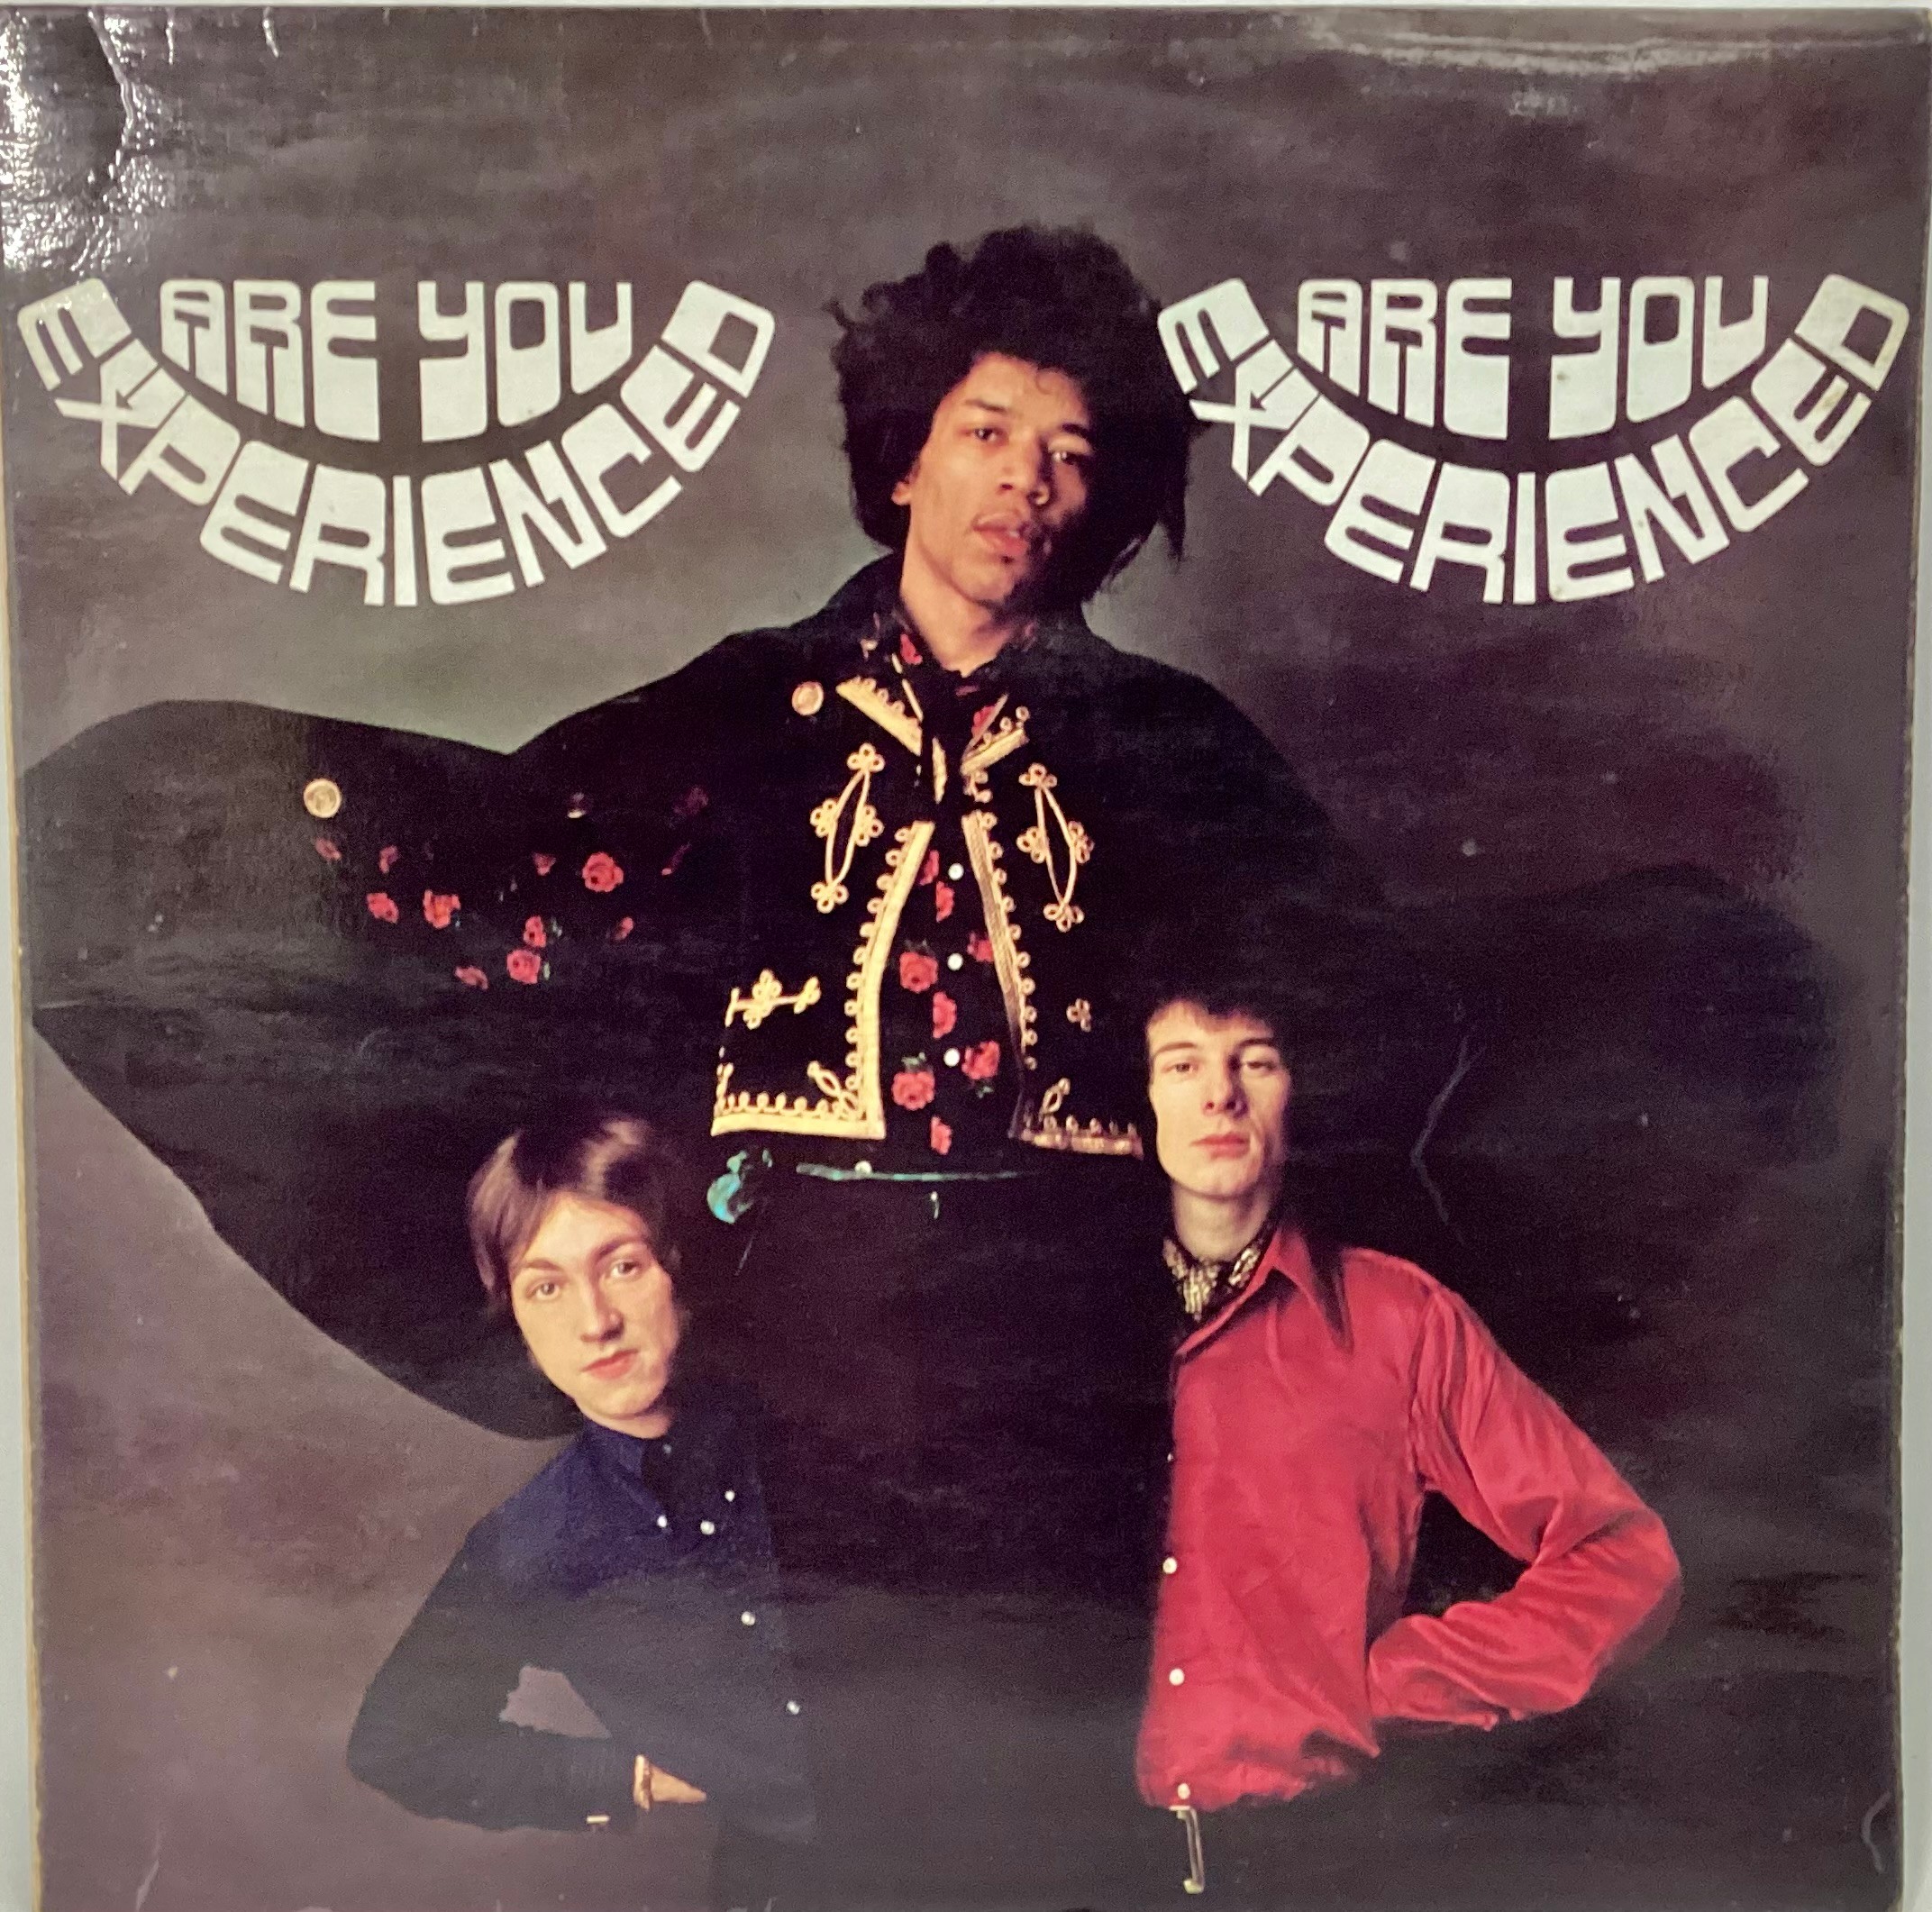 JIMI HENDRIX EXPERIENCE VINYL LP RECORD ‘ARE YOU EXPERIENCED’. From 1965 this is an original Track